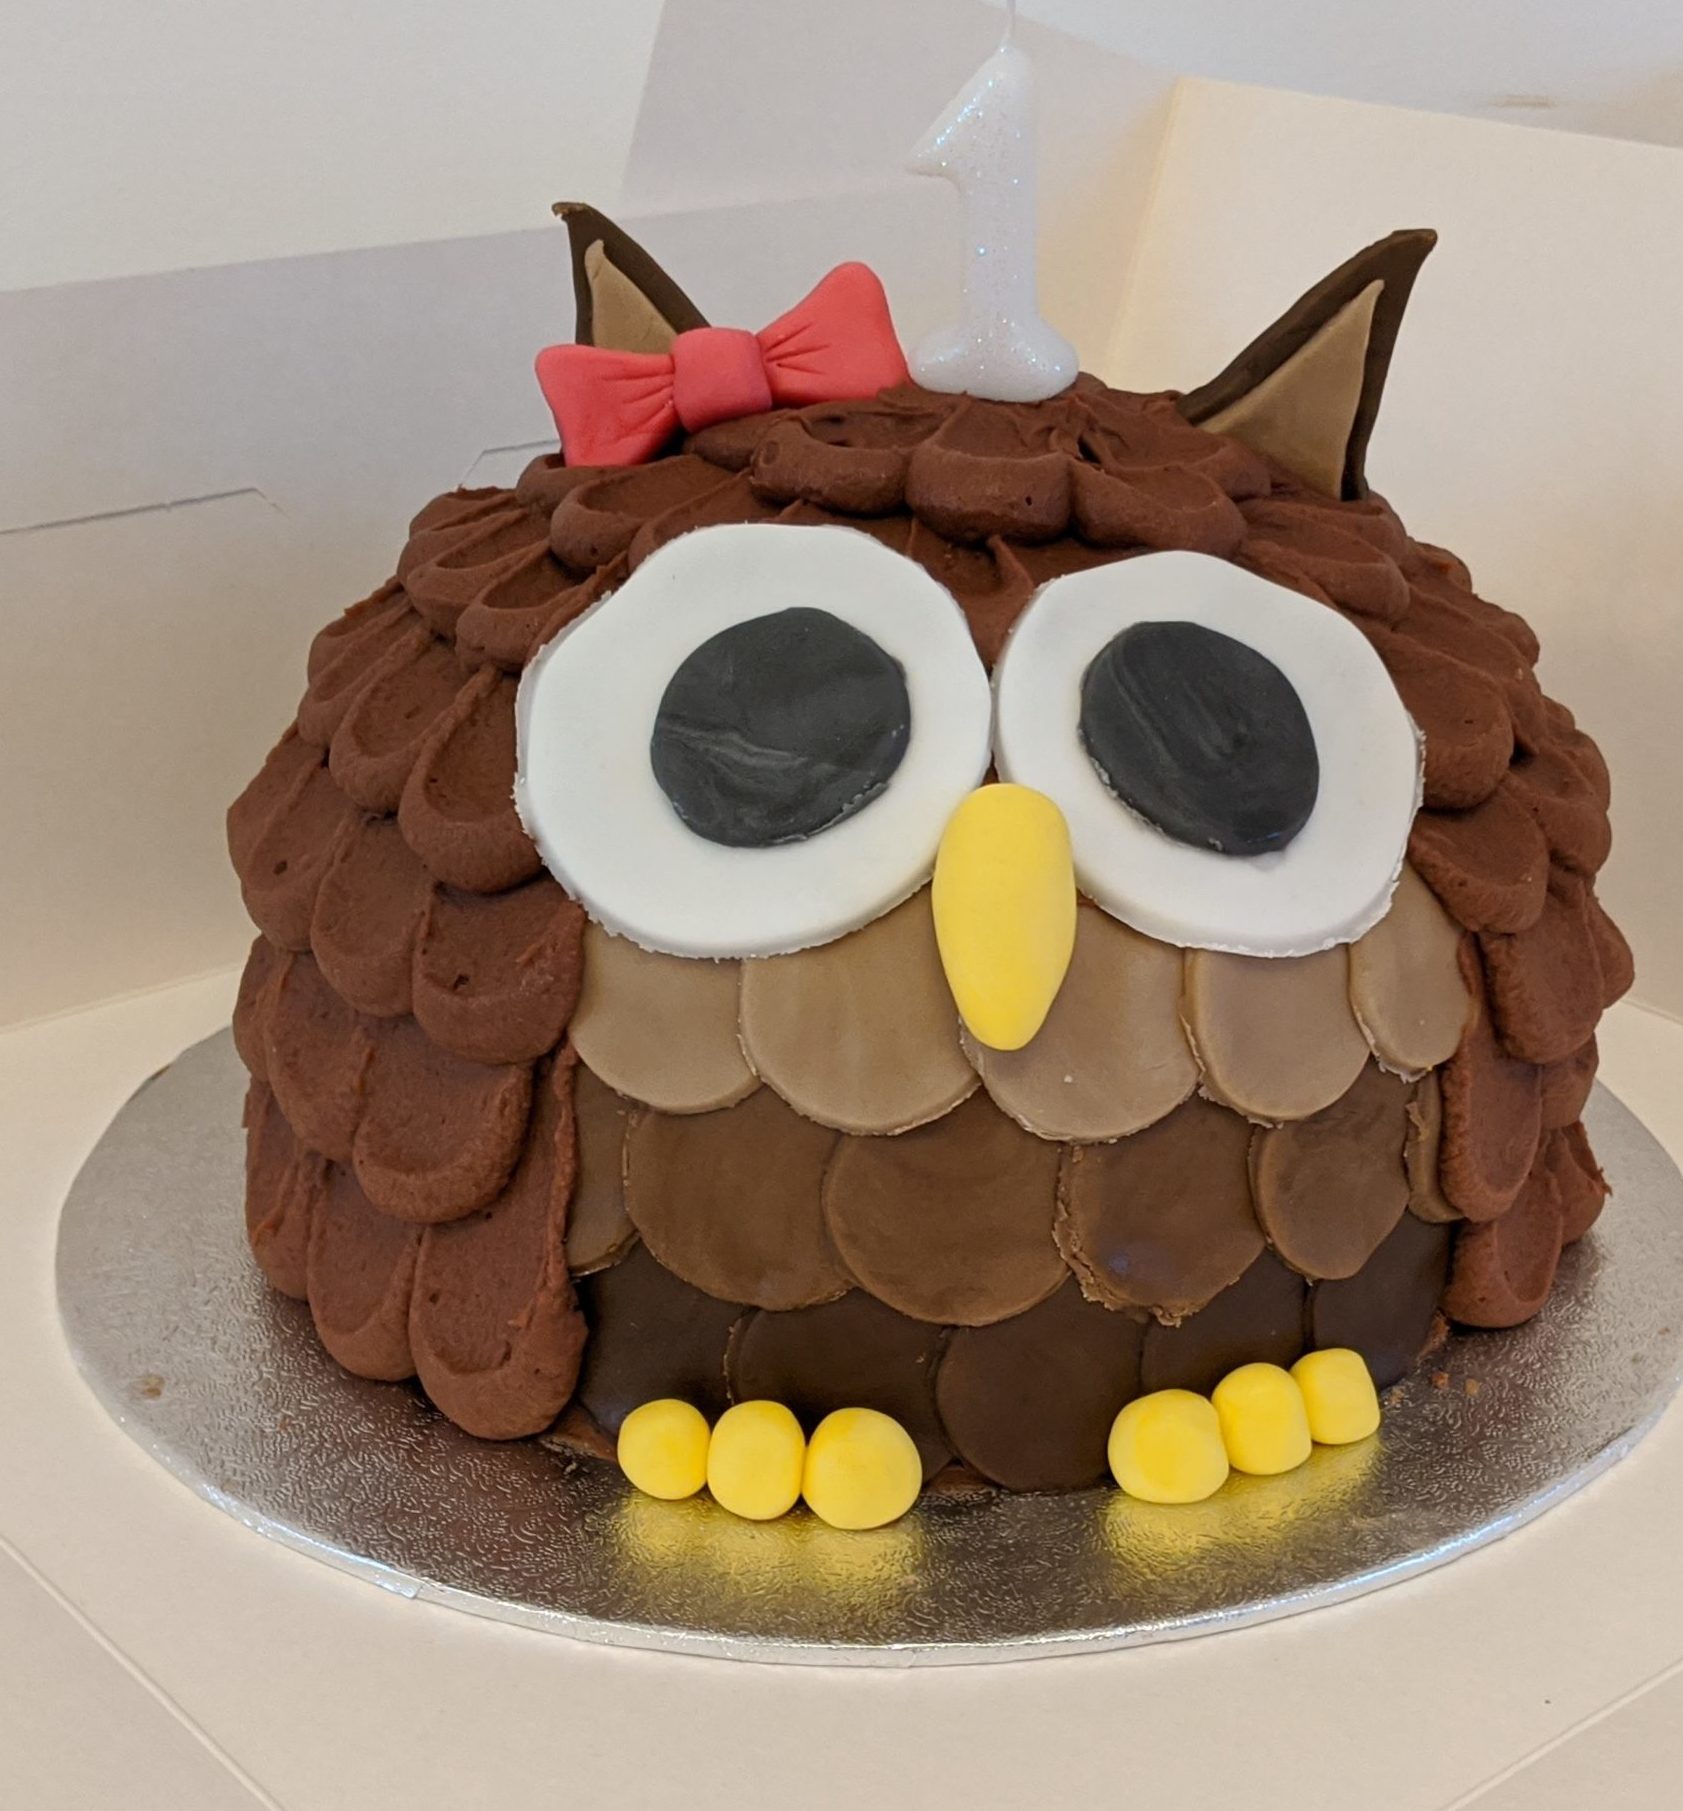 My niece requested a blue owl cake for her birthday, so that's what I made!  : r/Baking